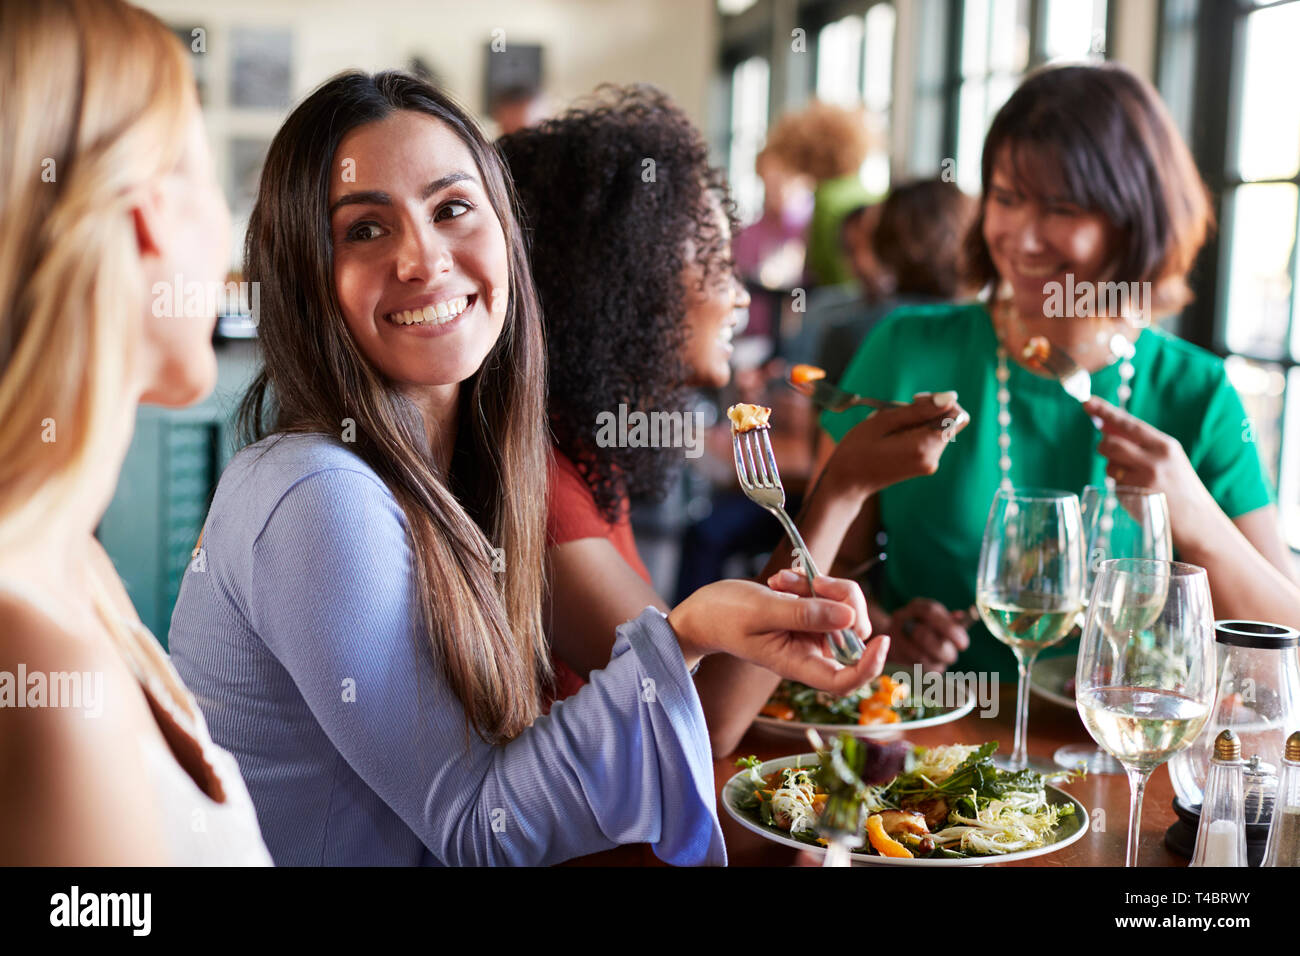 Group Of Female Friends Enjoying Meal In Restaurant Together Stock Photo